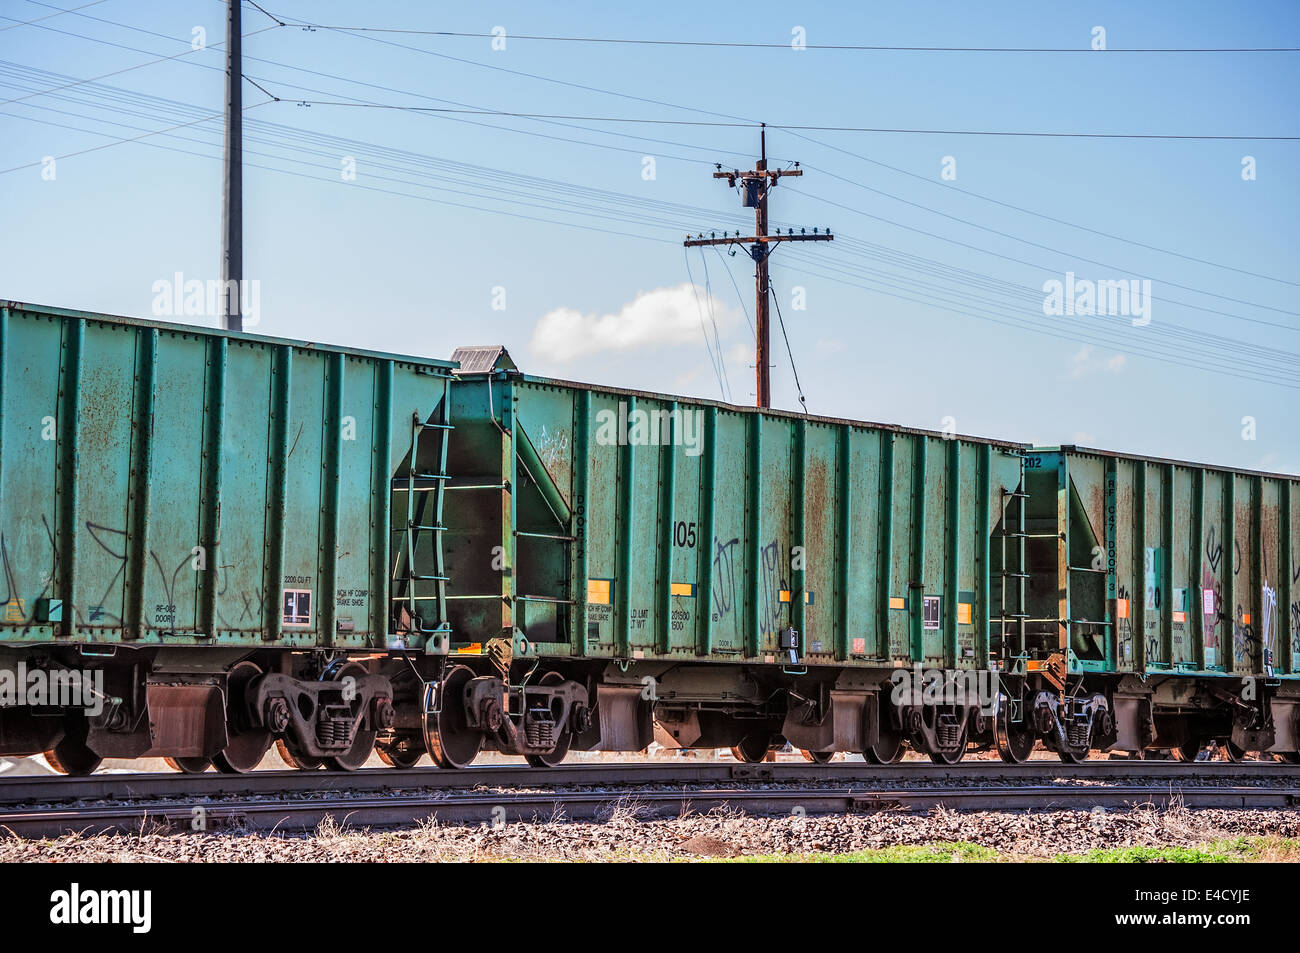 Railcars waiting on a siding for their turn to be loaded. Stock Photo